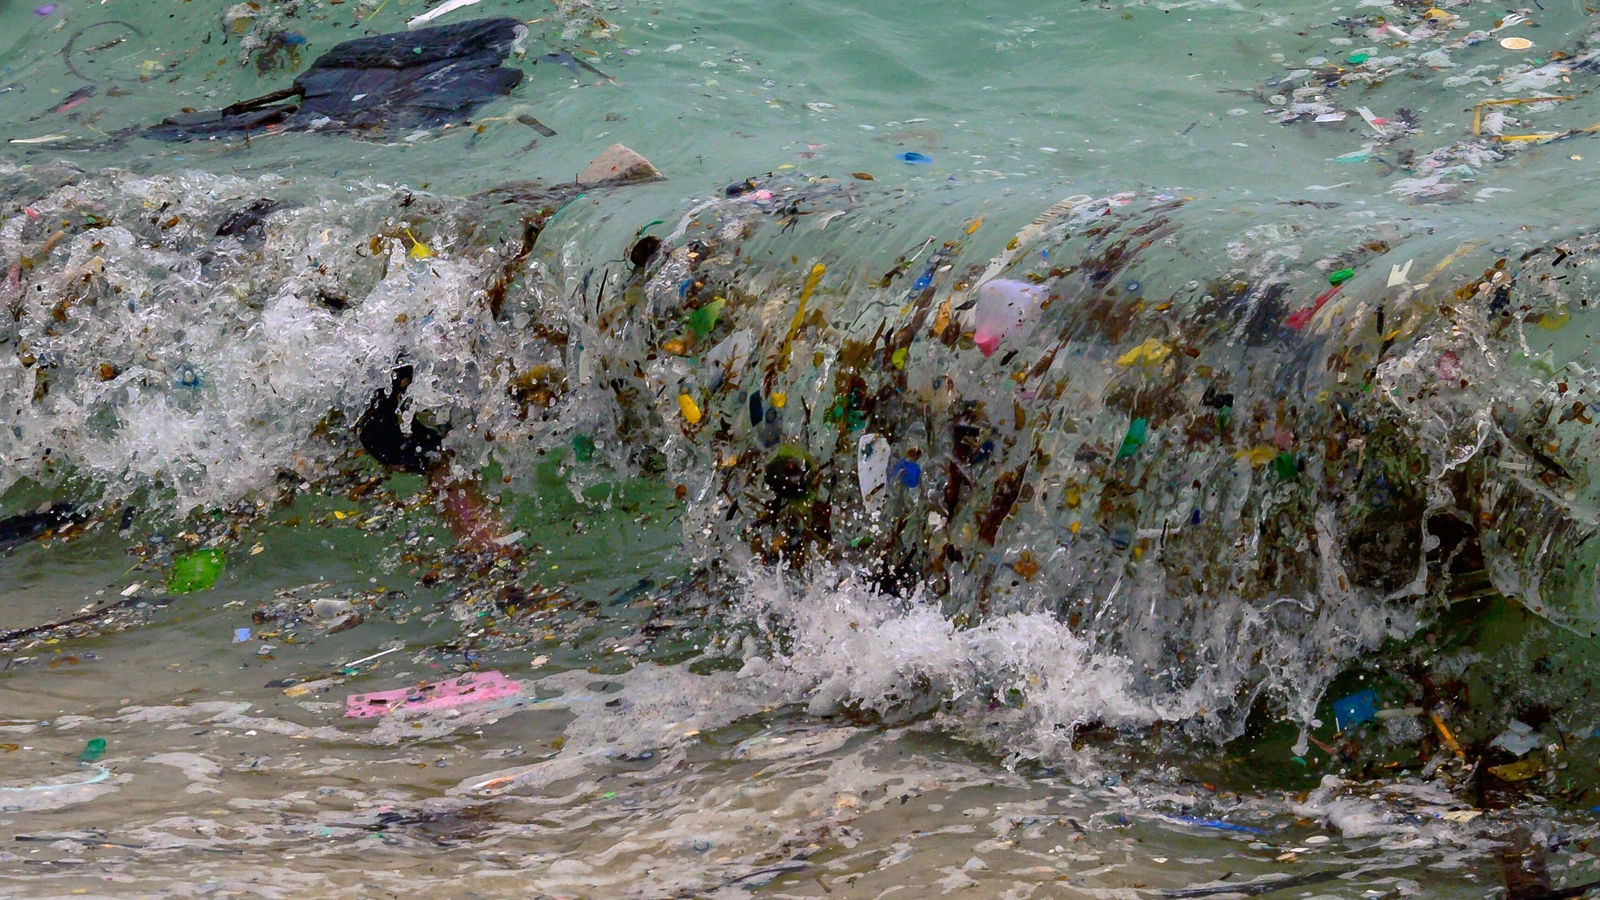 More than 170tn plastic particles in oceans - research